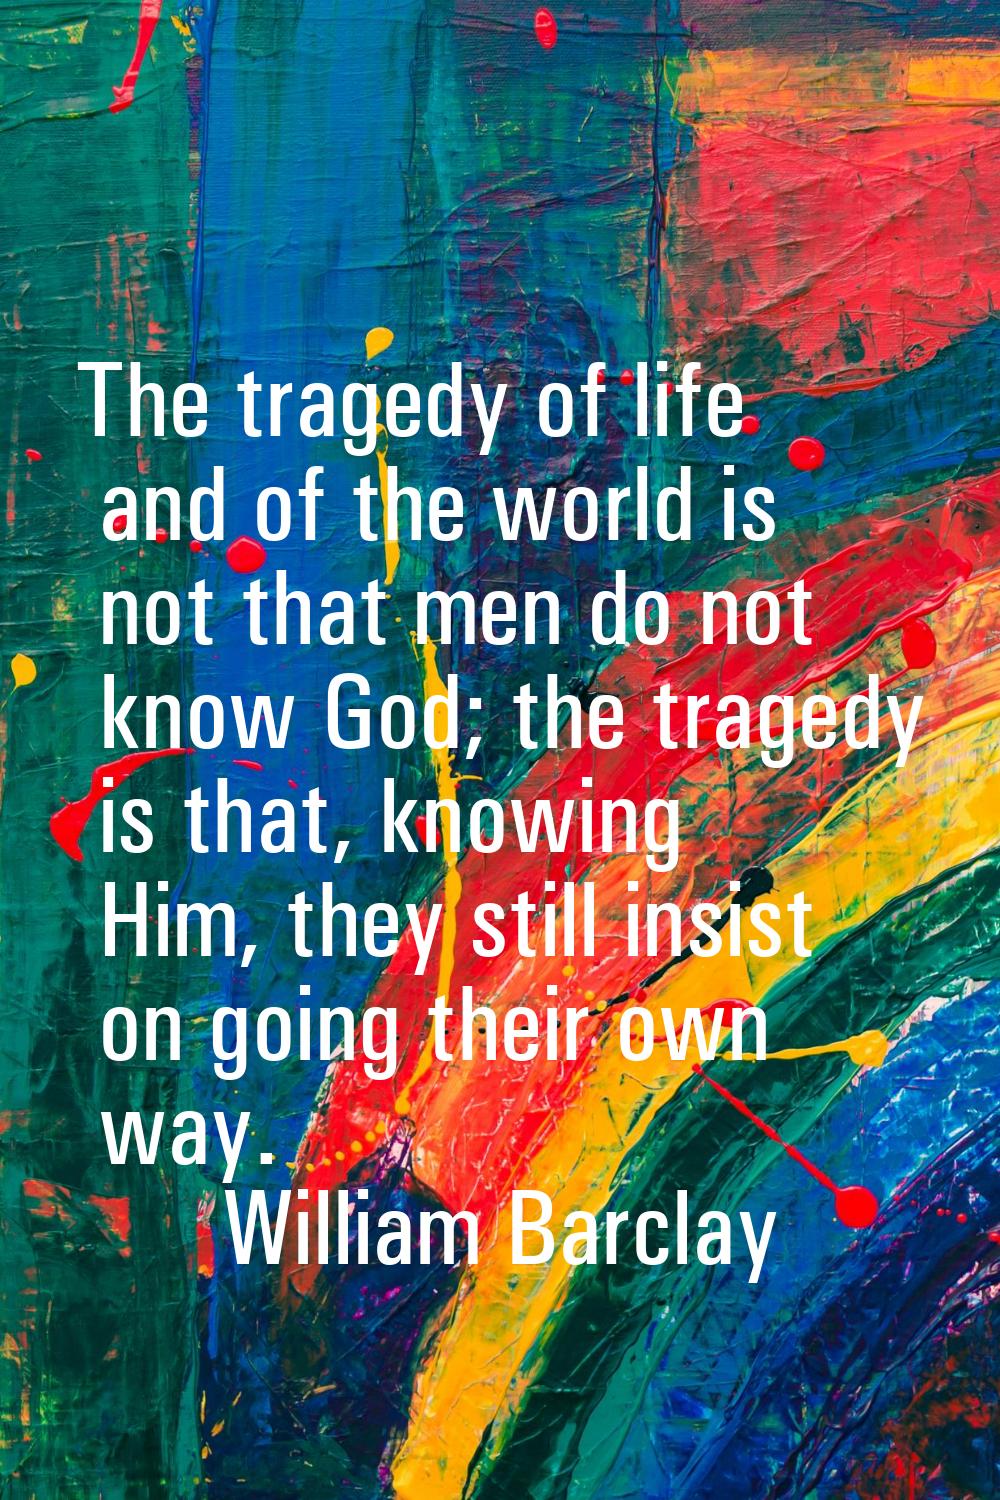 The tragedy of life and of the world is not that men do not know God; the tragedy is that, knowing 